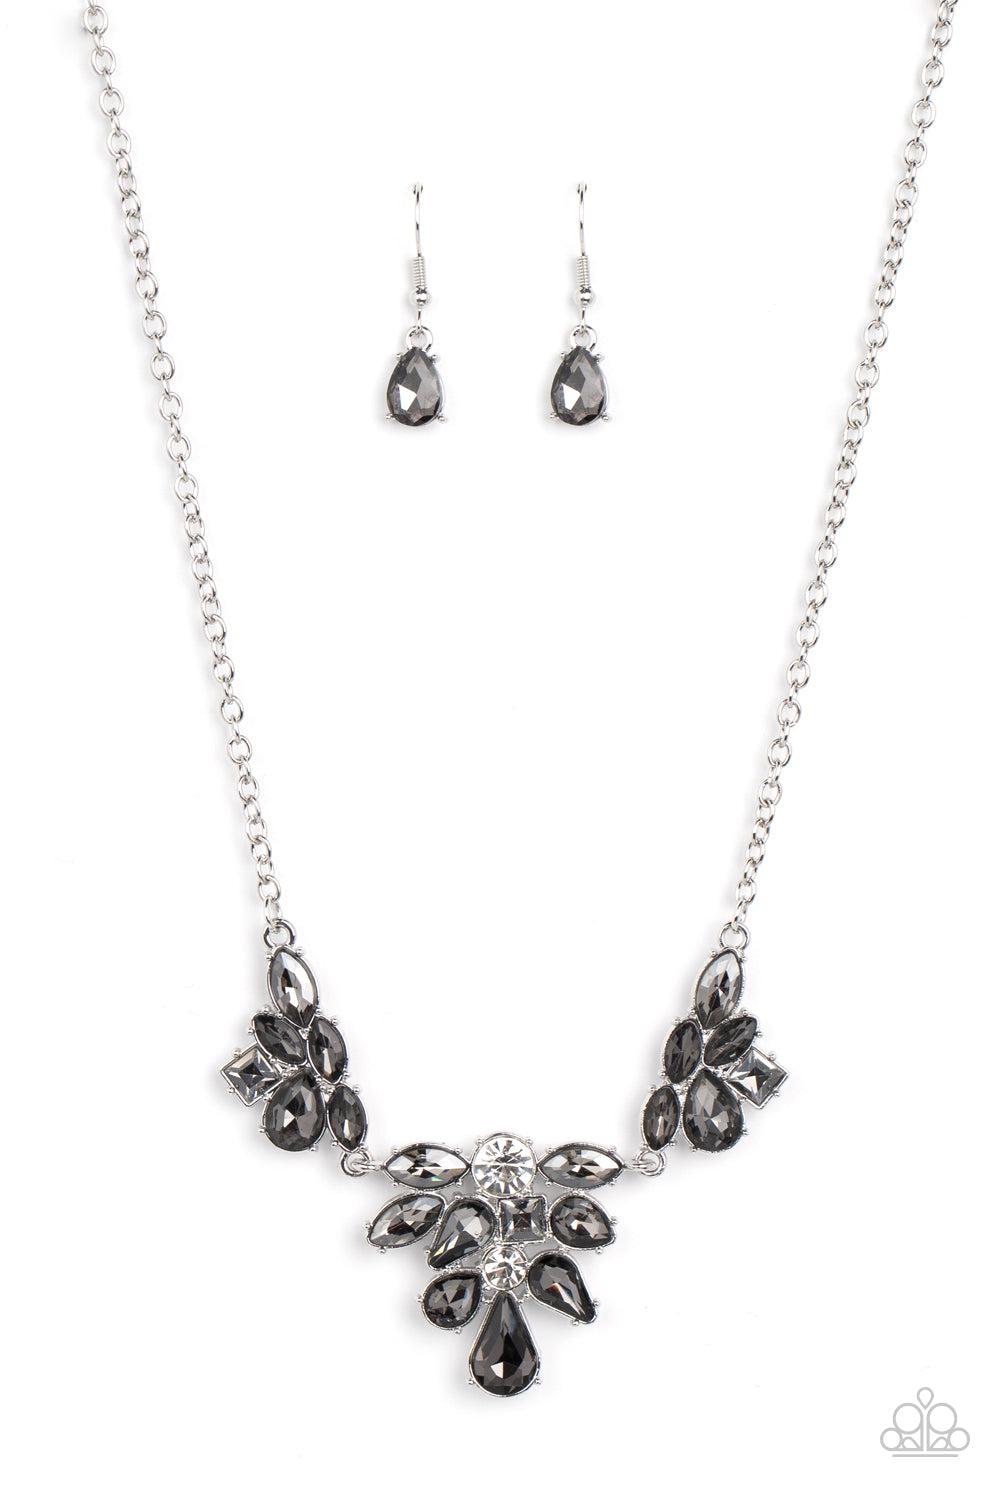 Completely Captivated Silver Rhinestone Necklace - Paparazzi Accessories- lightbox - CarasShop.com - $5 Jewelry by Cara Jewels